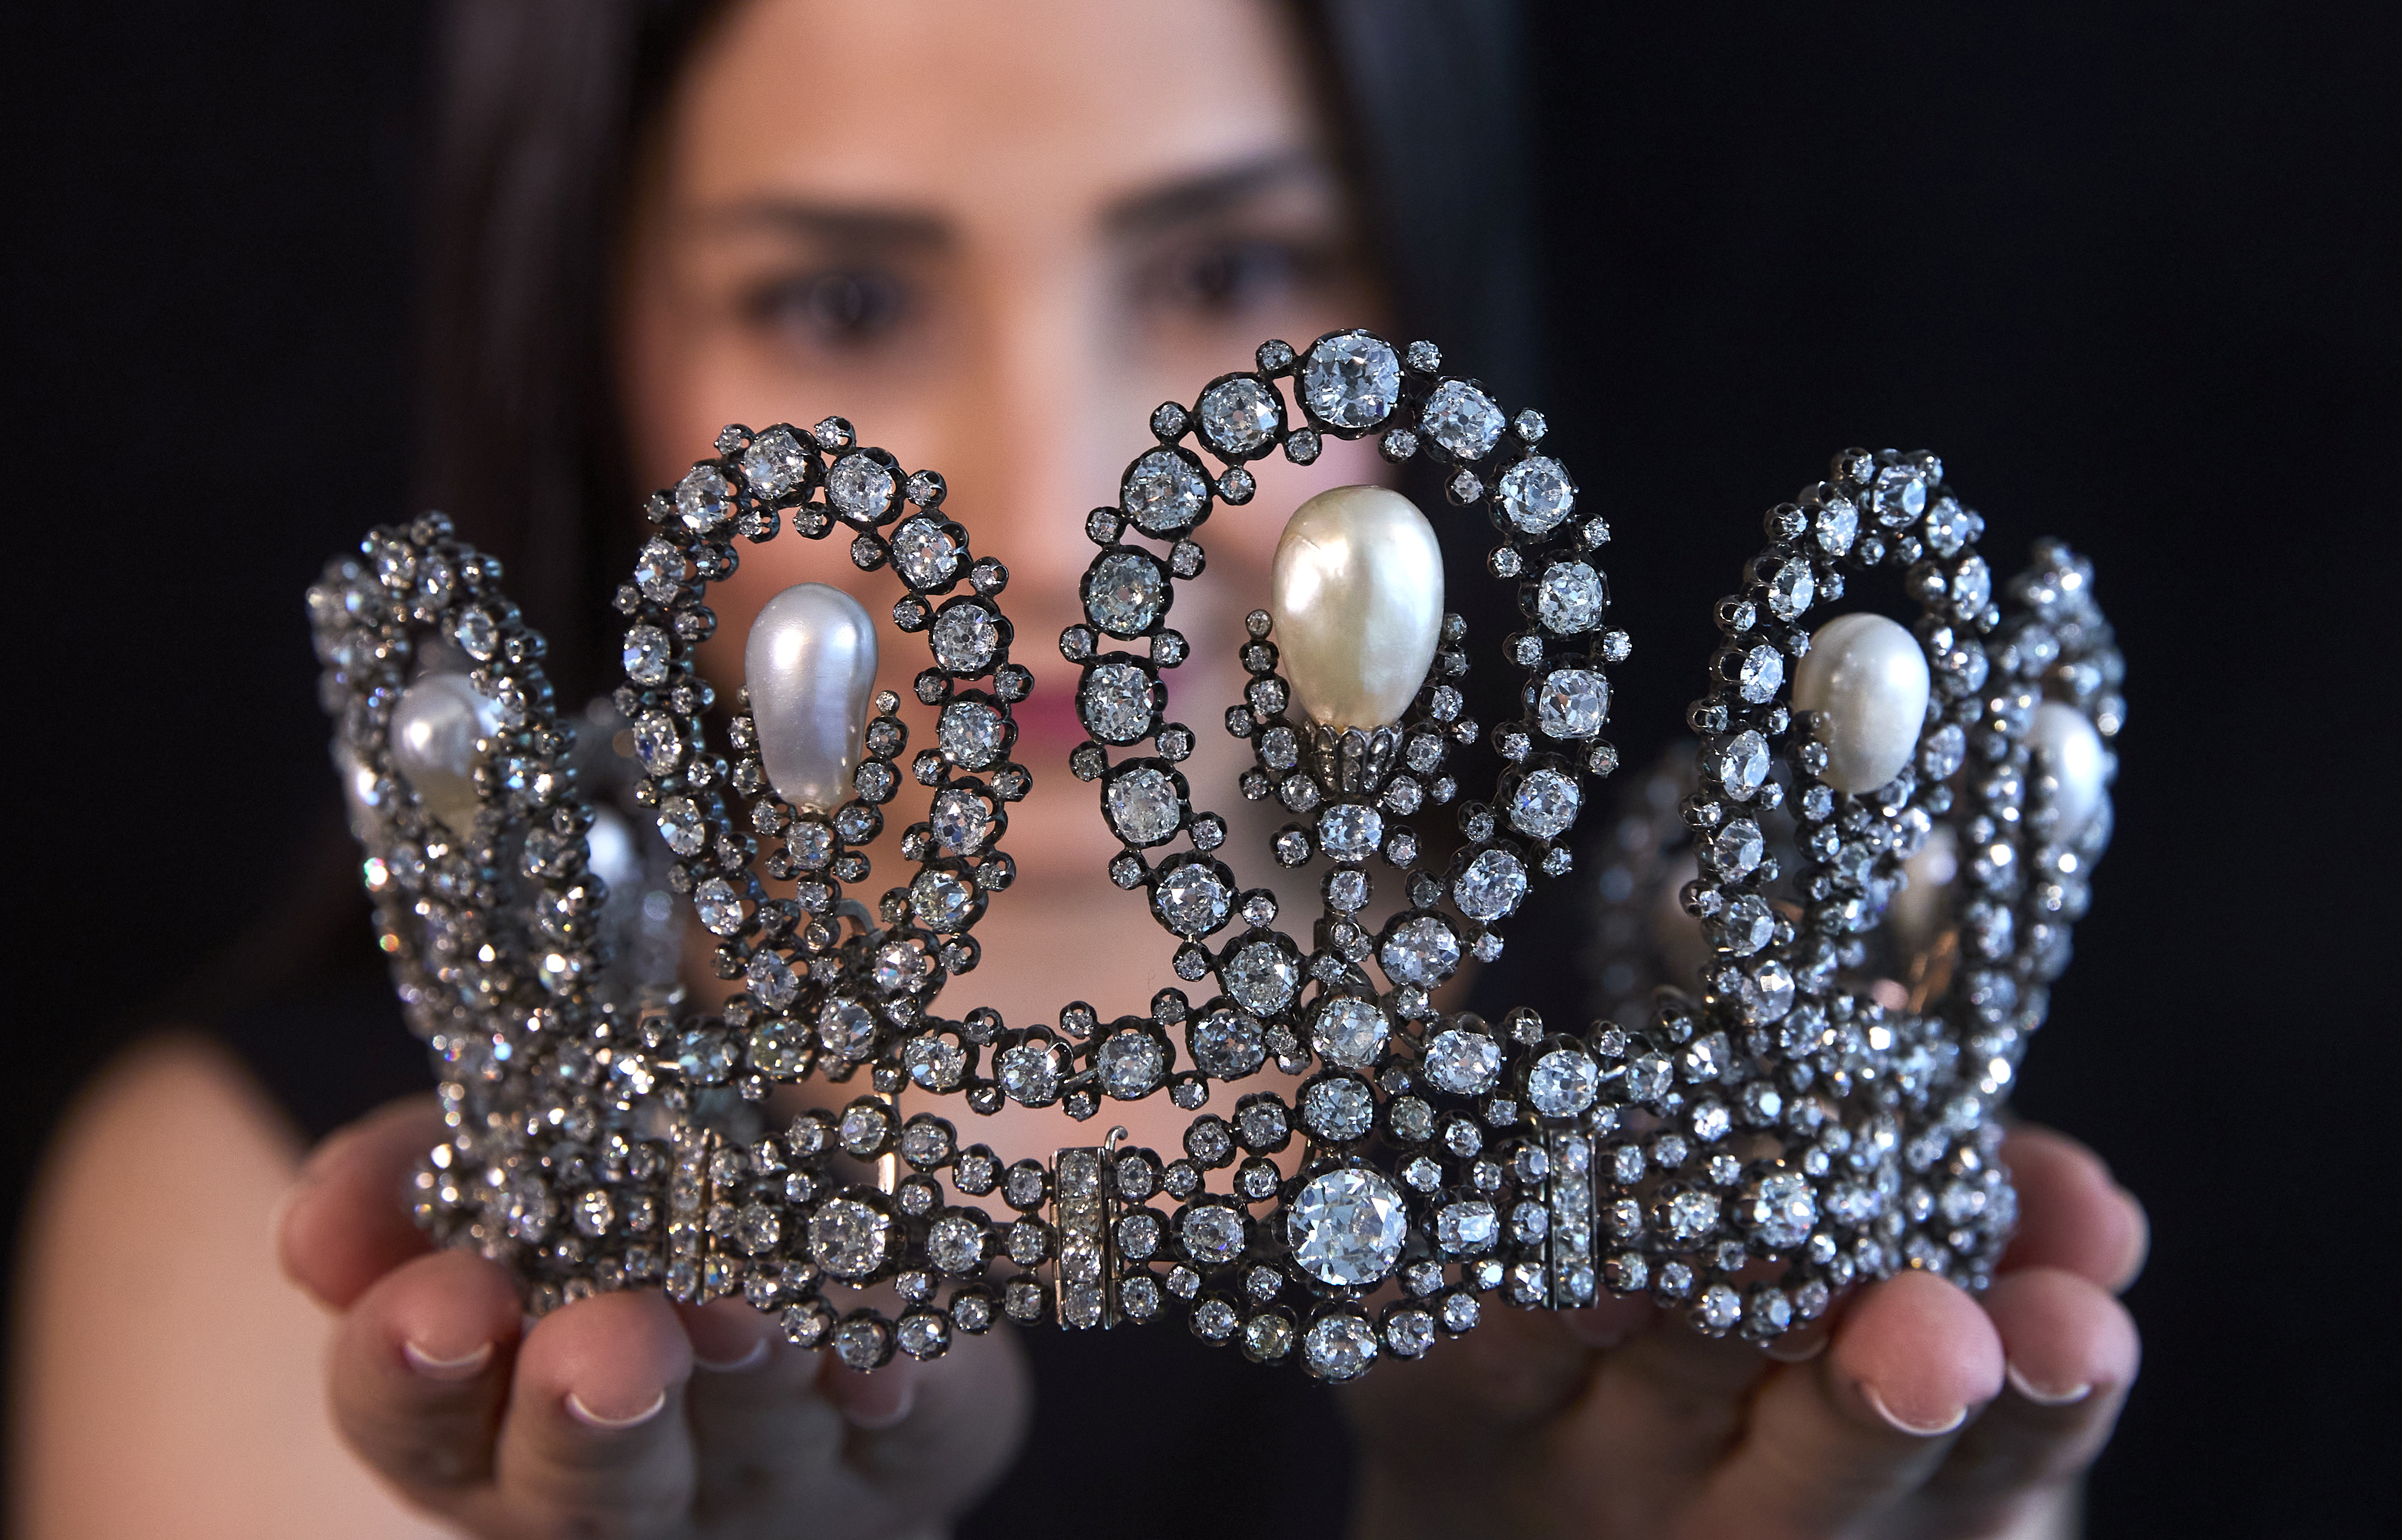 Preview of jewels before Sotheby's auction in Geneva